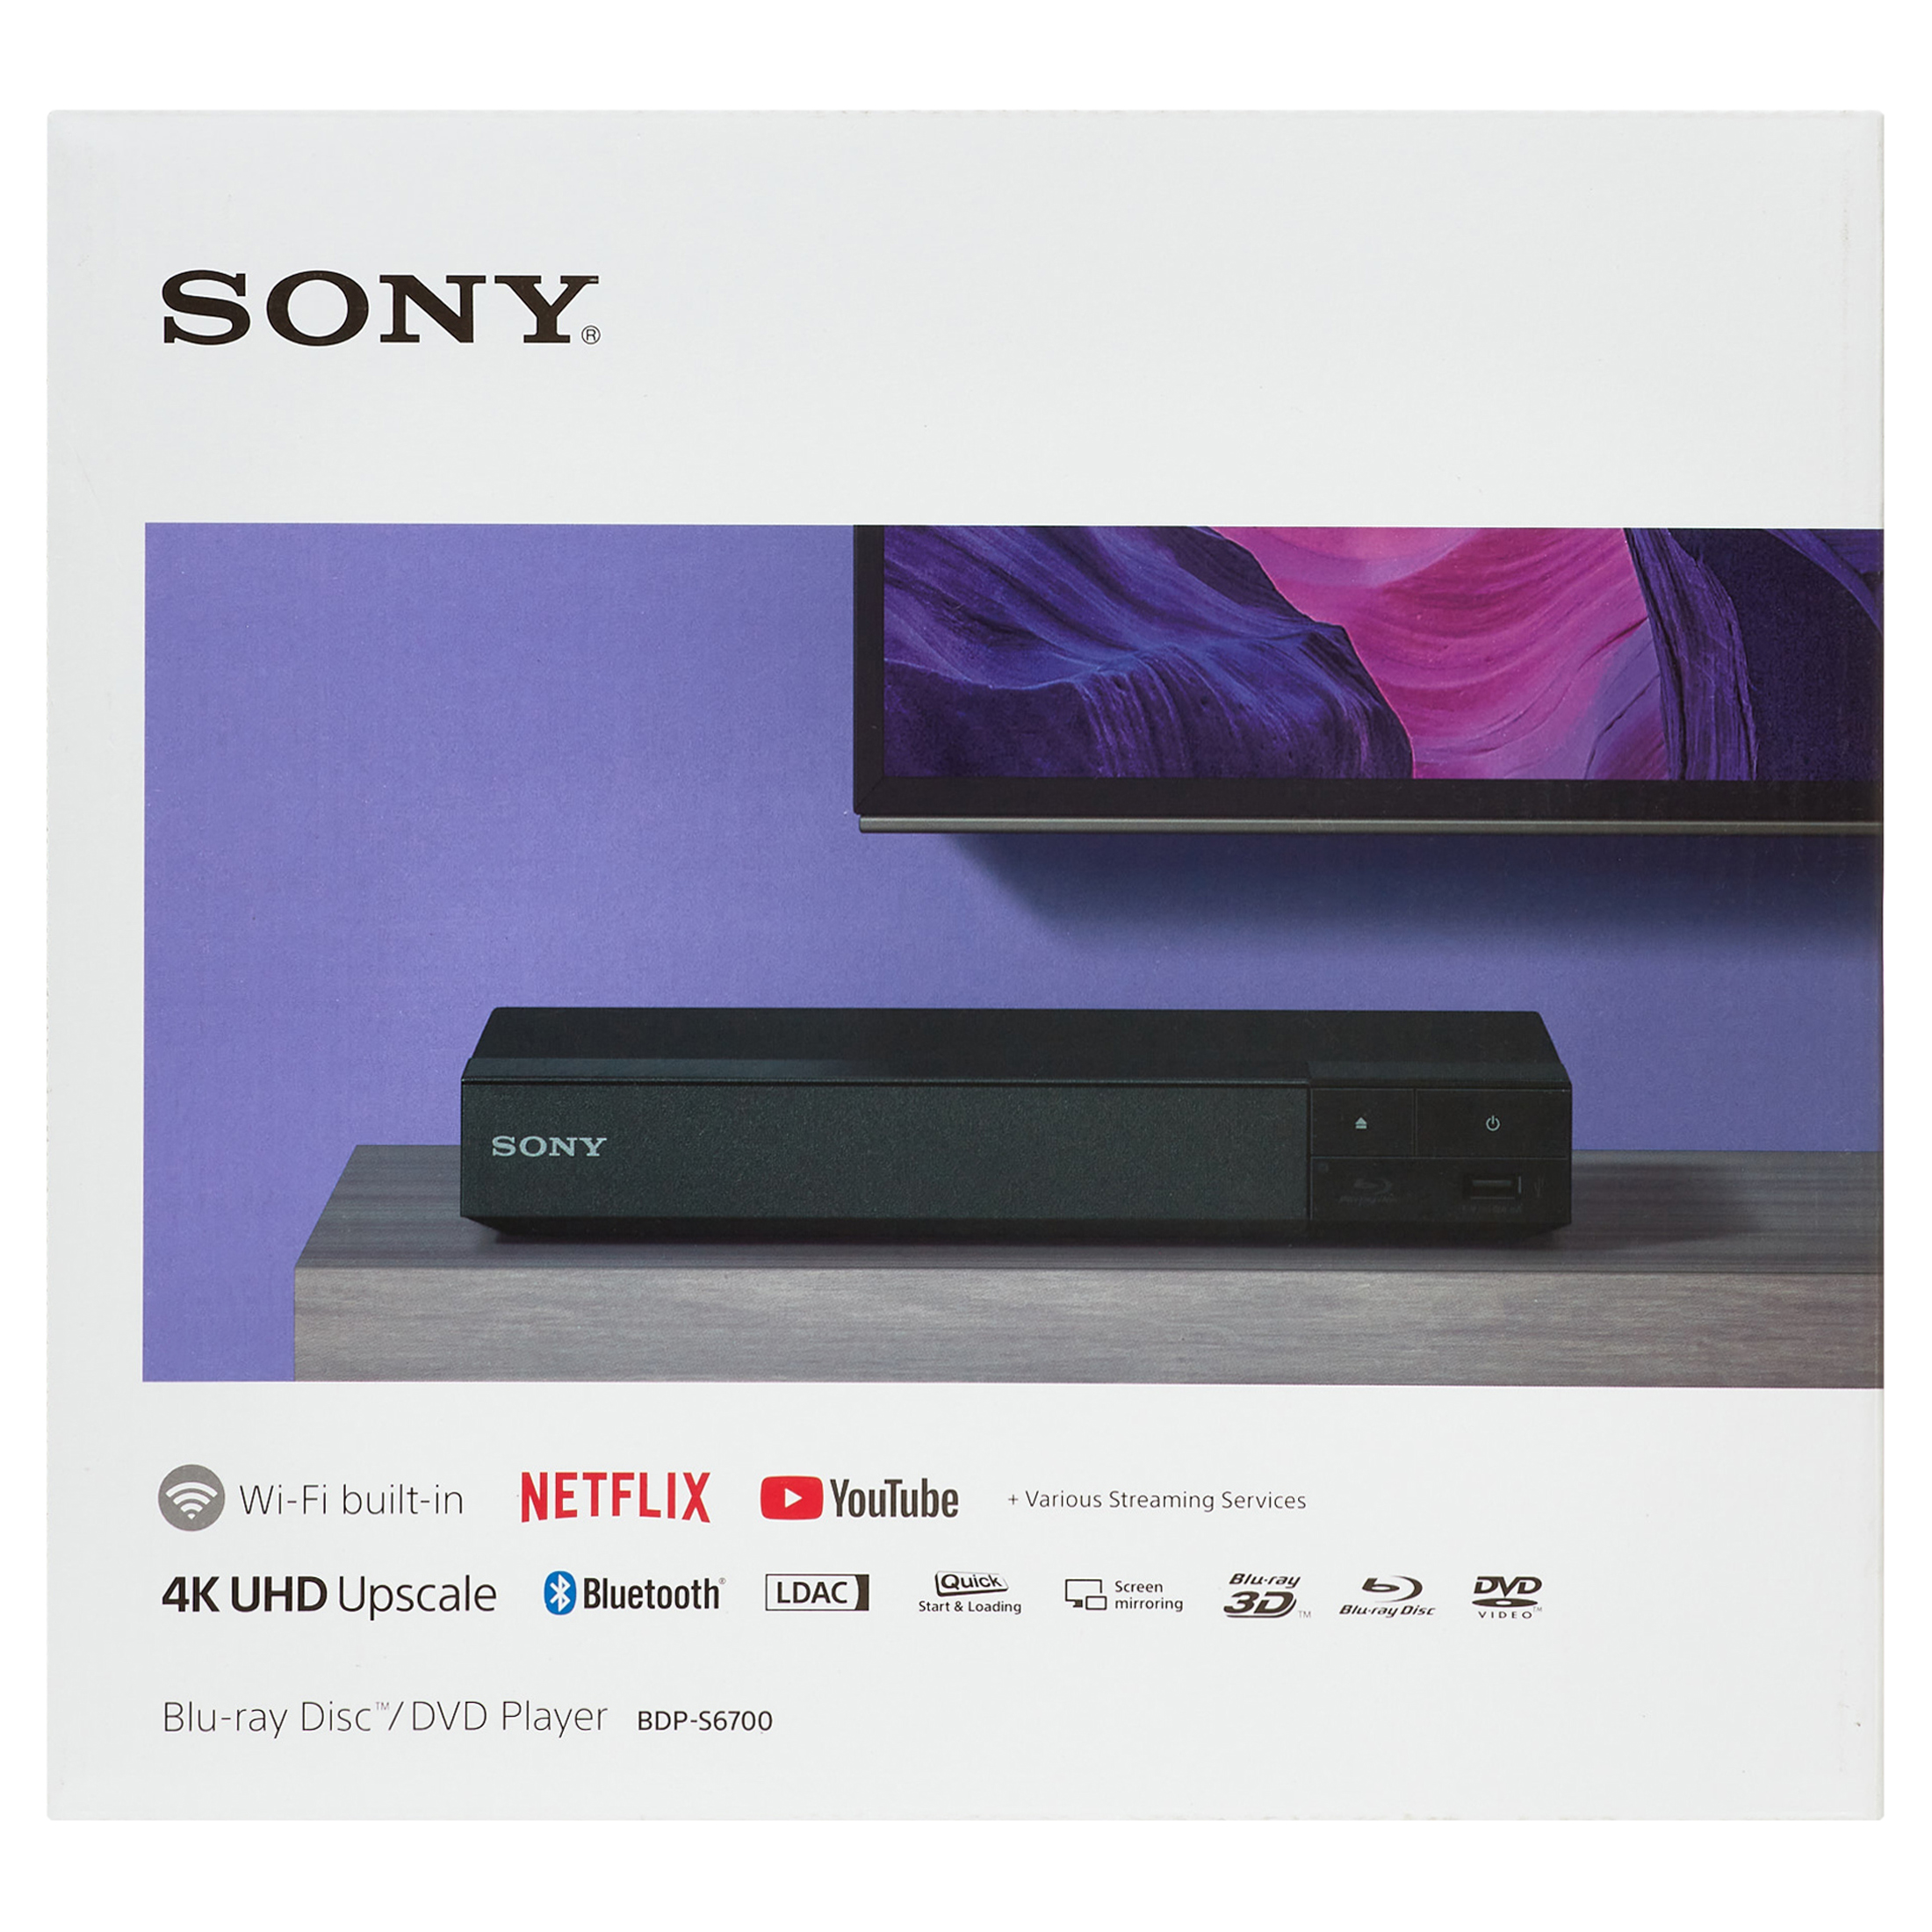 Sony BDP-S6700 4K Upscaling 3D Home Theater Streaming Blu-Ray DVD Player with Wi-Fi, Dolby Digital TrueHD/DTS, and upscaling - image 4 of 10